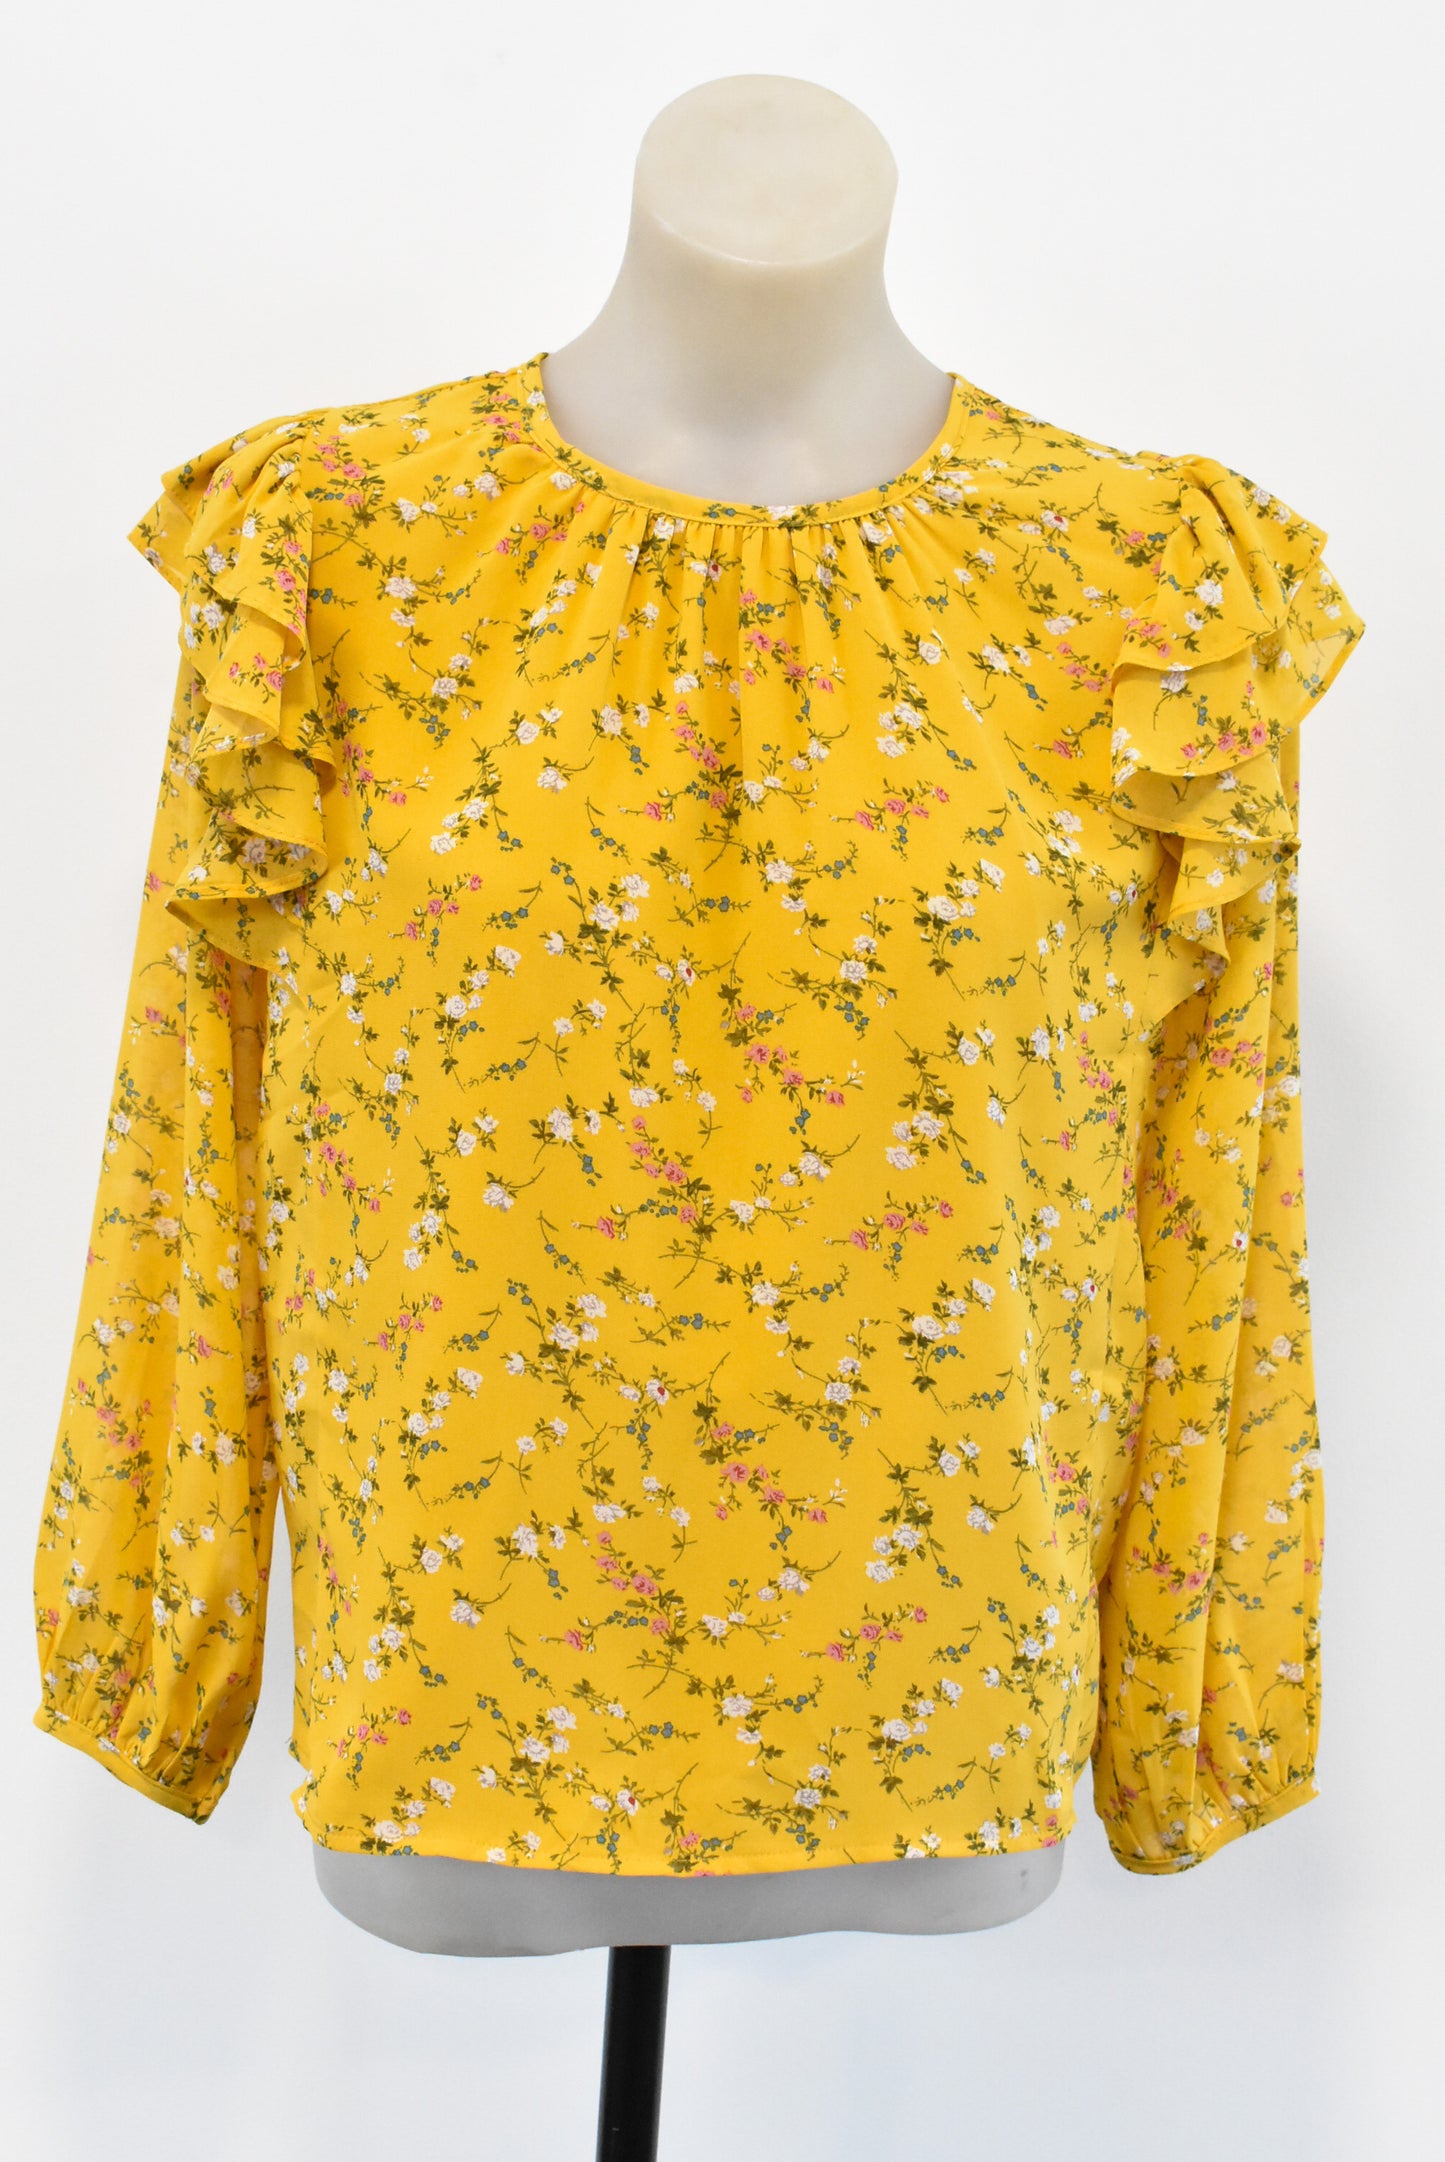 Zym's House floral yellow top, S